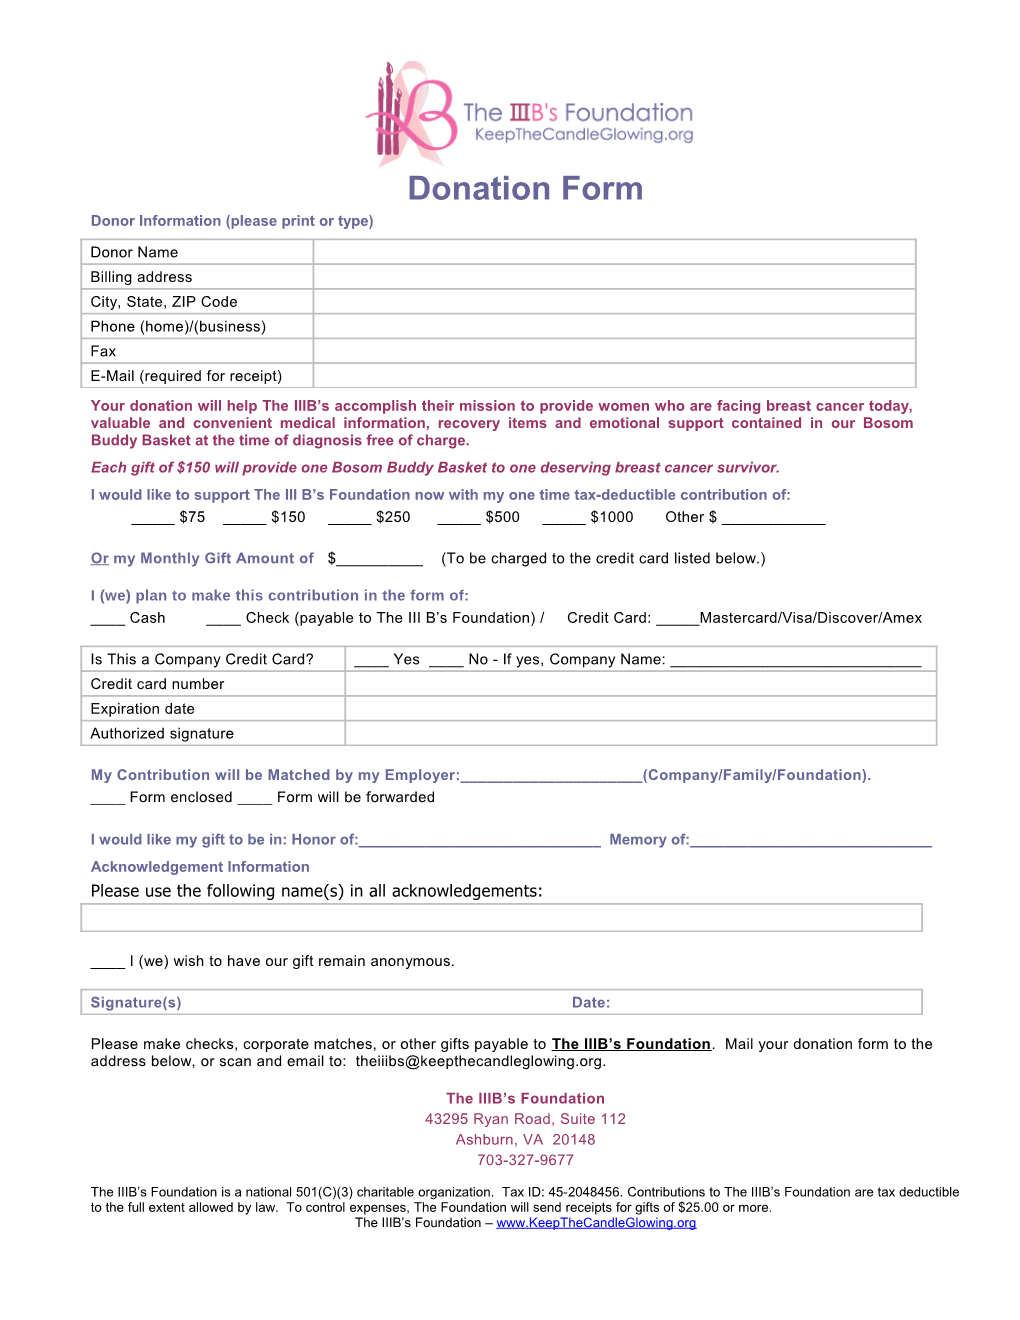 Donor Information (Please Print Or Type)